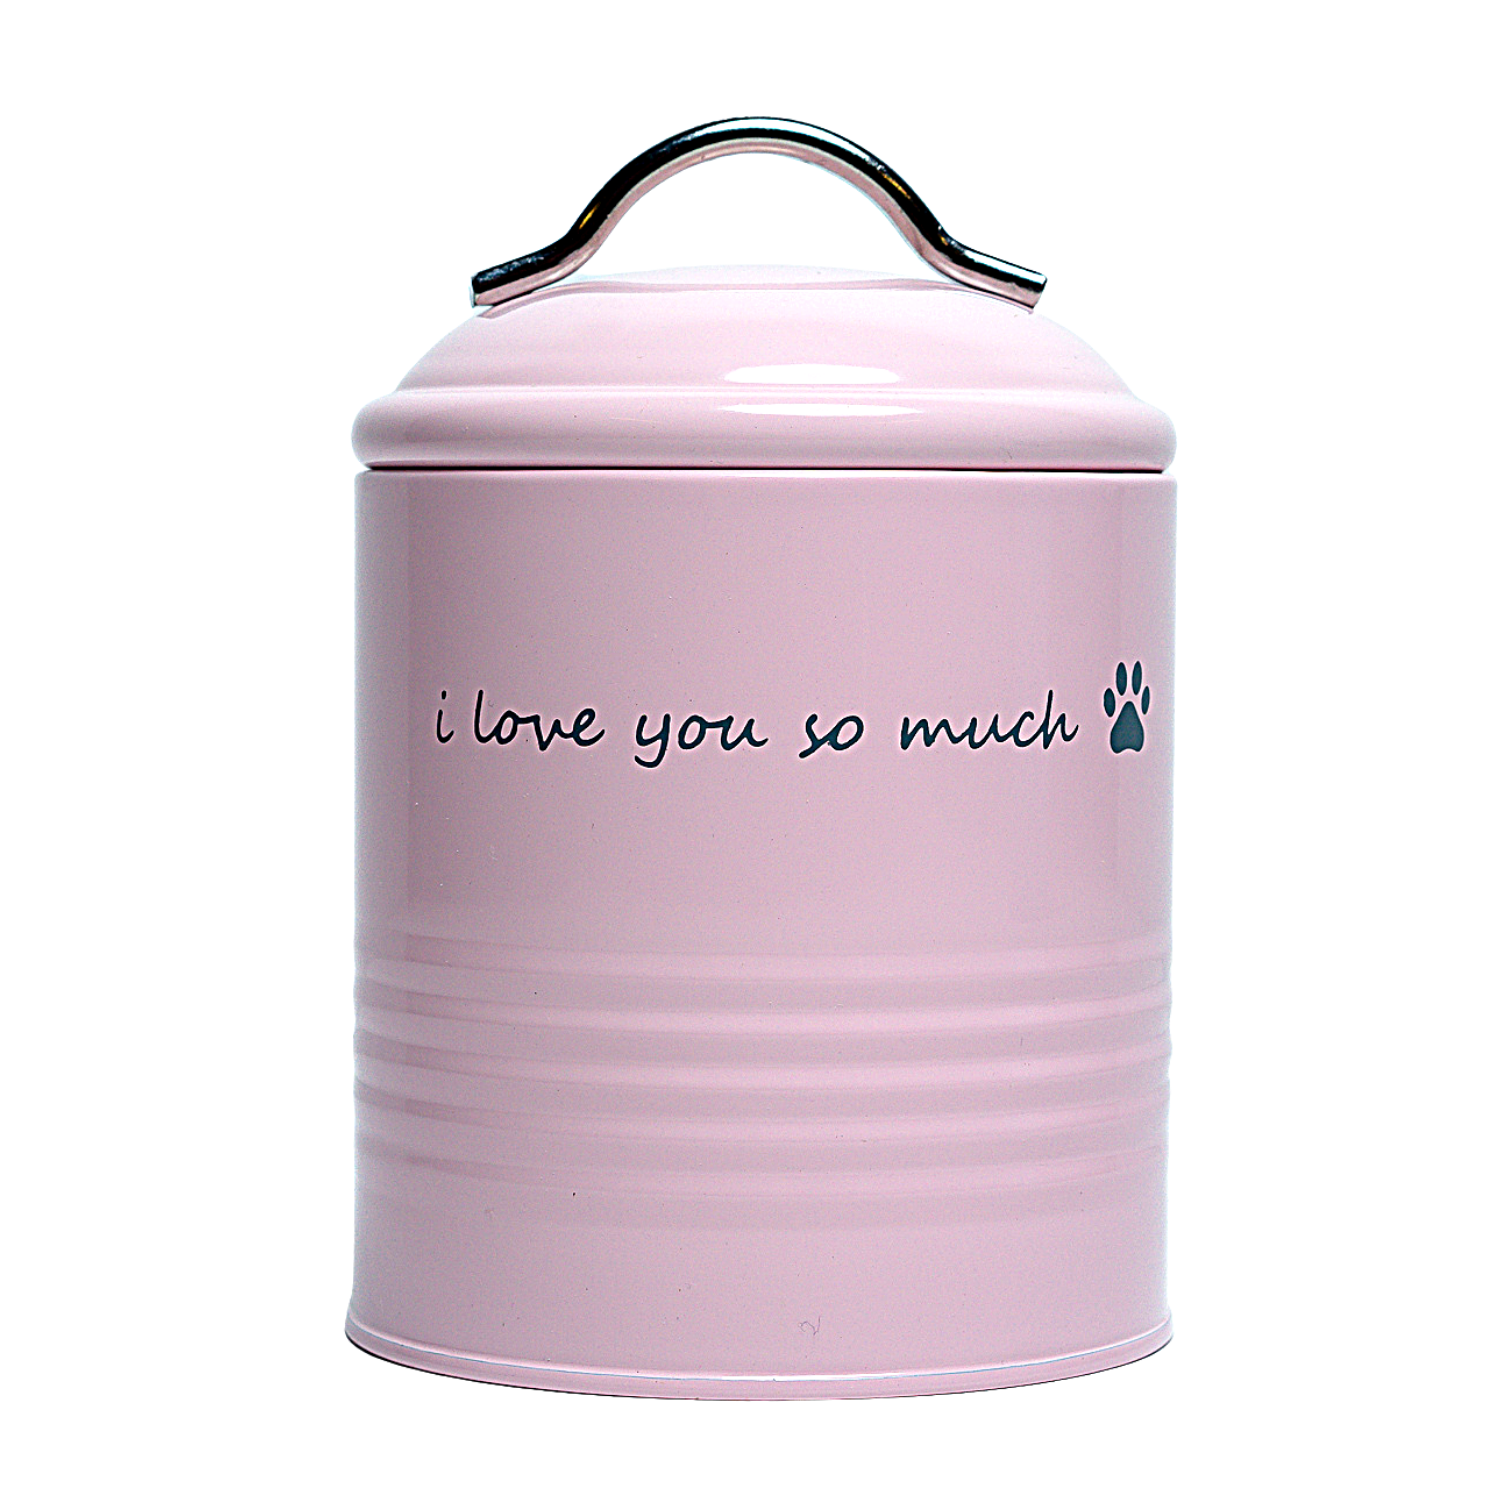 I Love You So Much Dog Treat Canister Gift Set-2